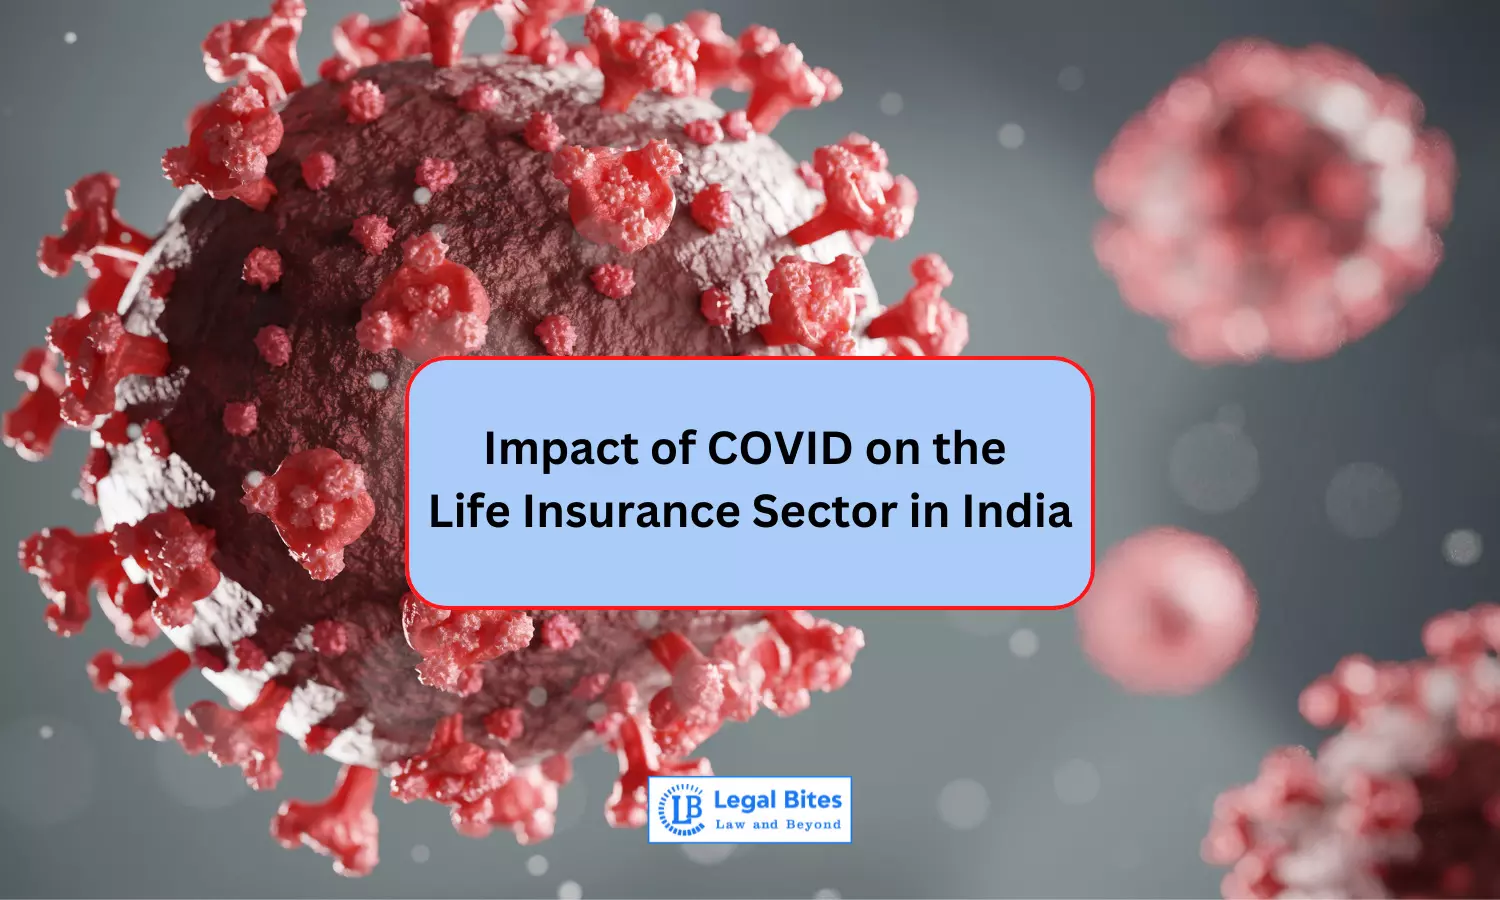 Impact of COVID on the Life Insurance Sector in India